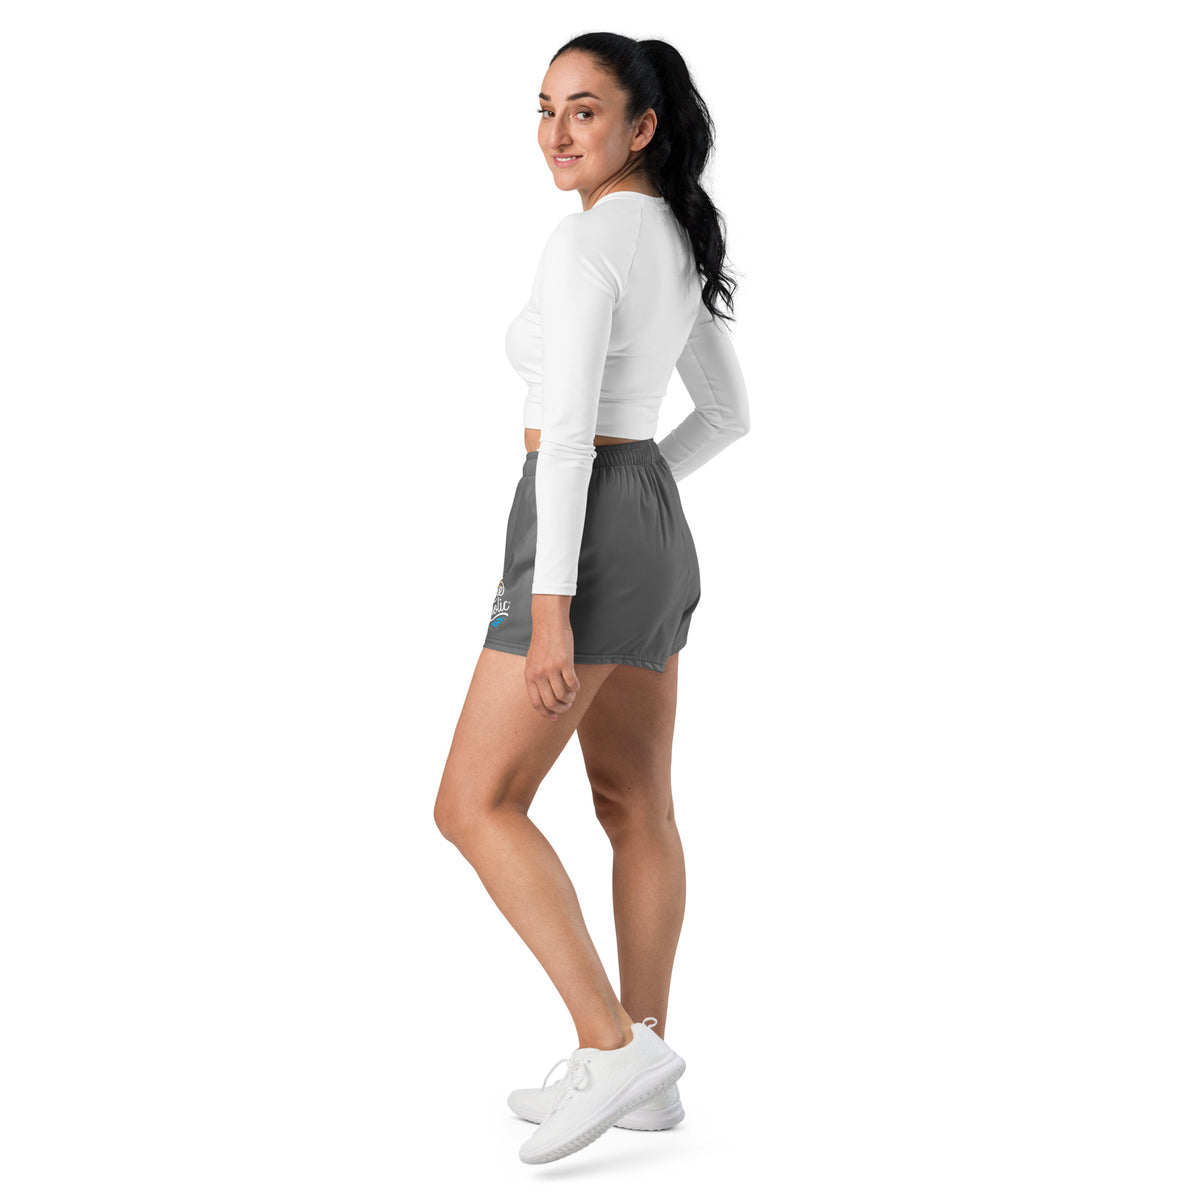 Lakeaholic Women’s Recycled Athletic Shorts